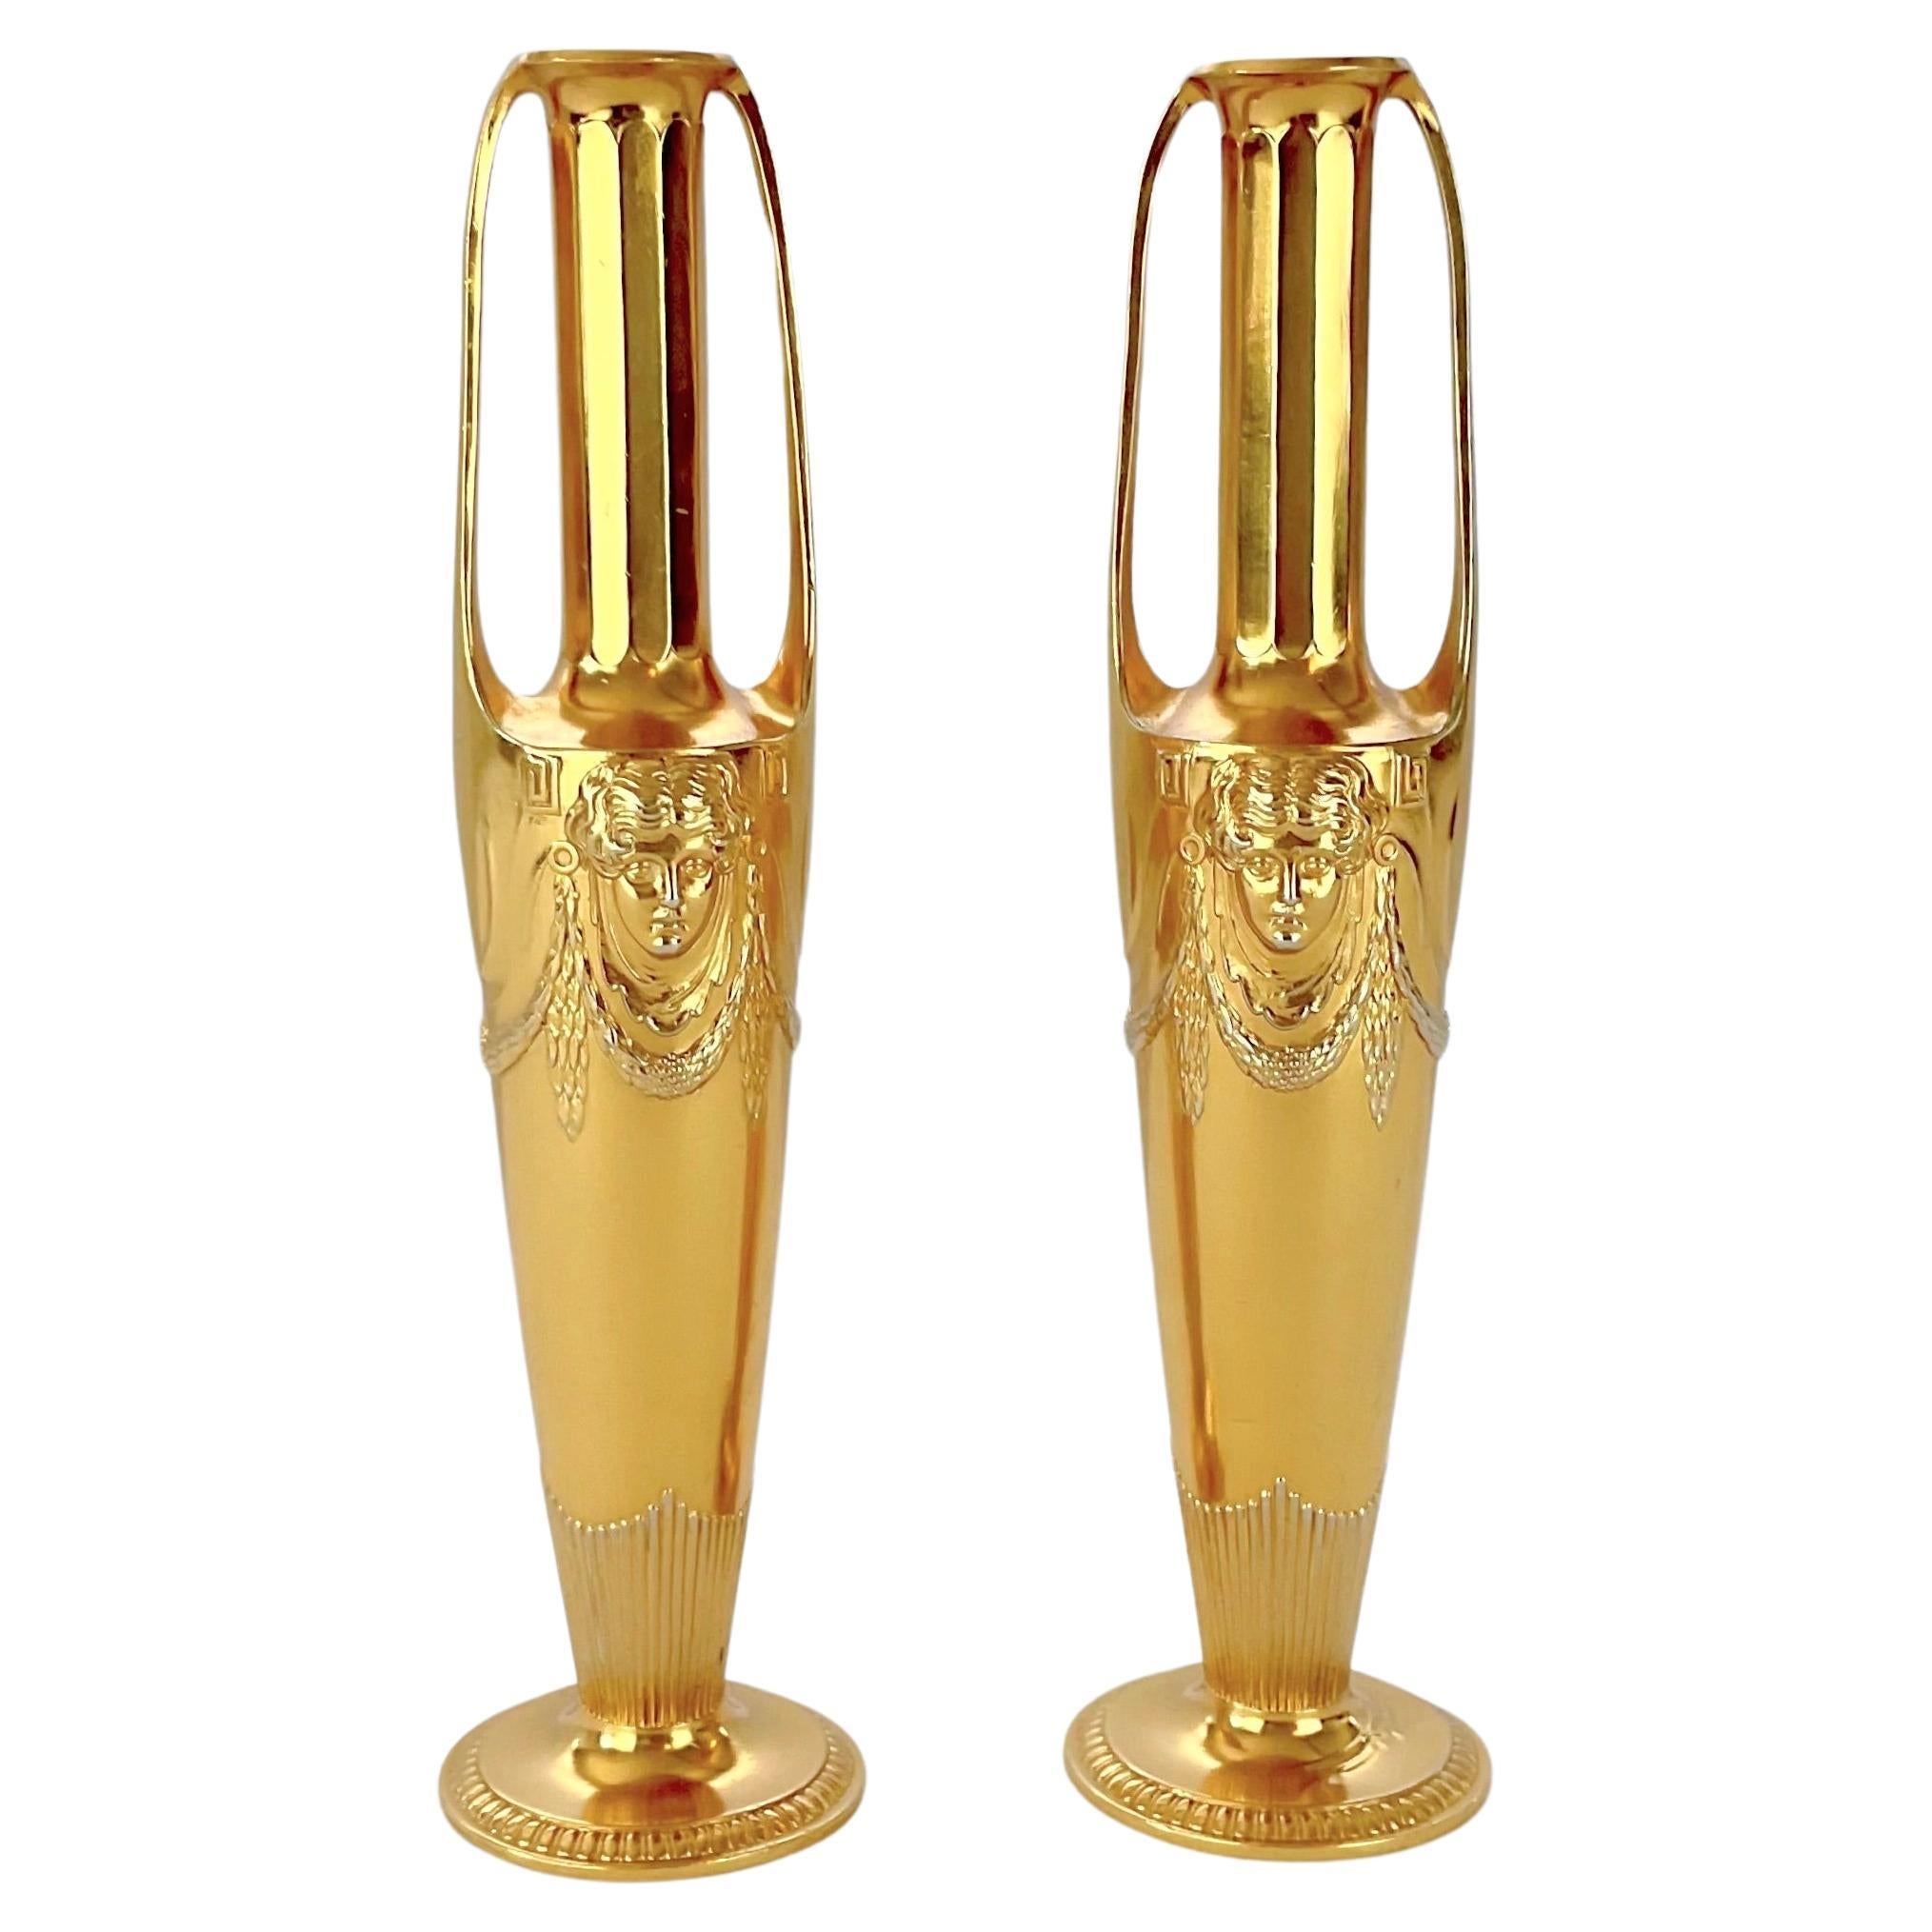 Antique Gilt Metal Vase Pair in Neoclassical Style by Orivit AG of Germany